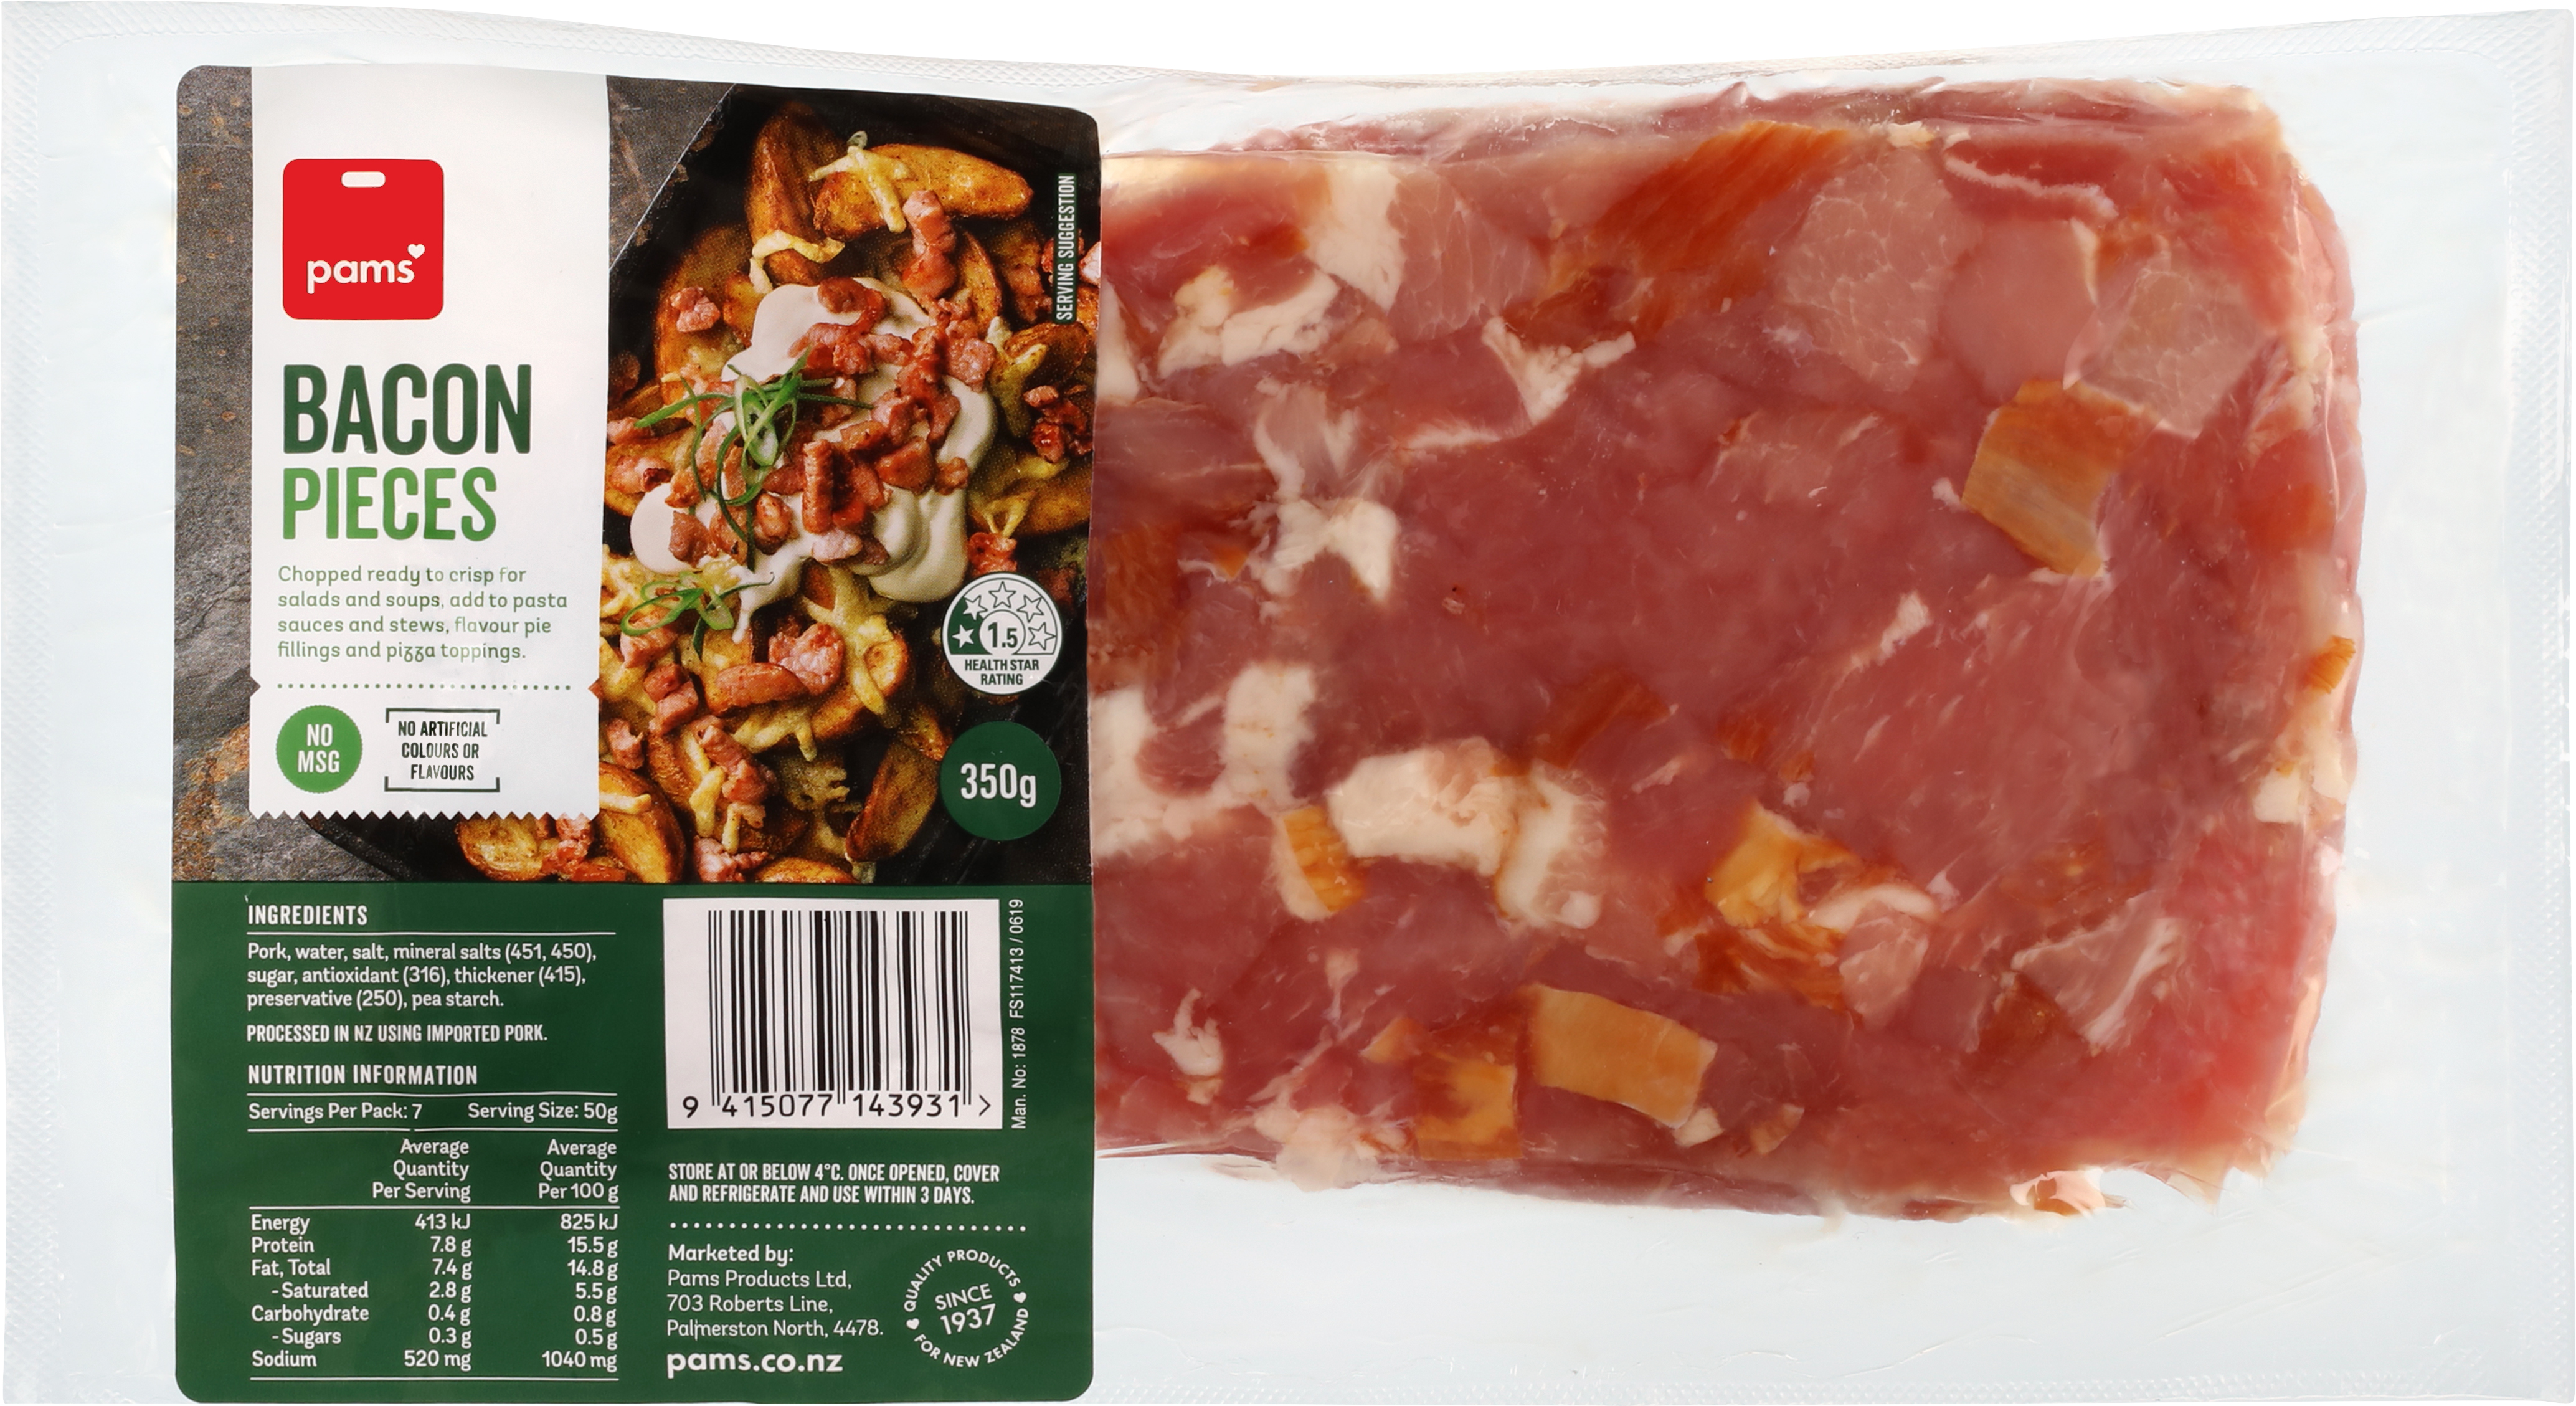 A pack of Pams brand Bacon Pieces 350g.